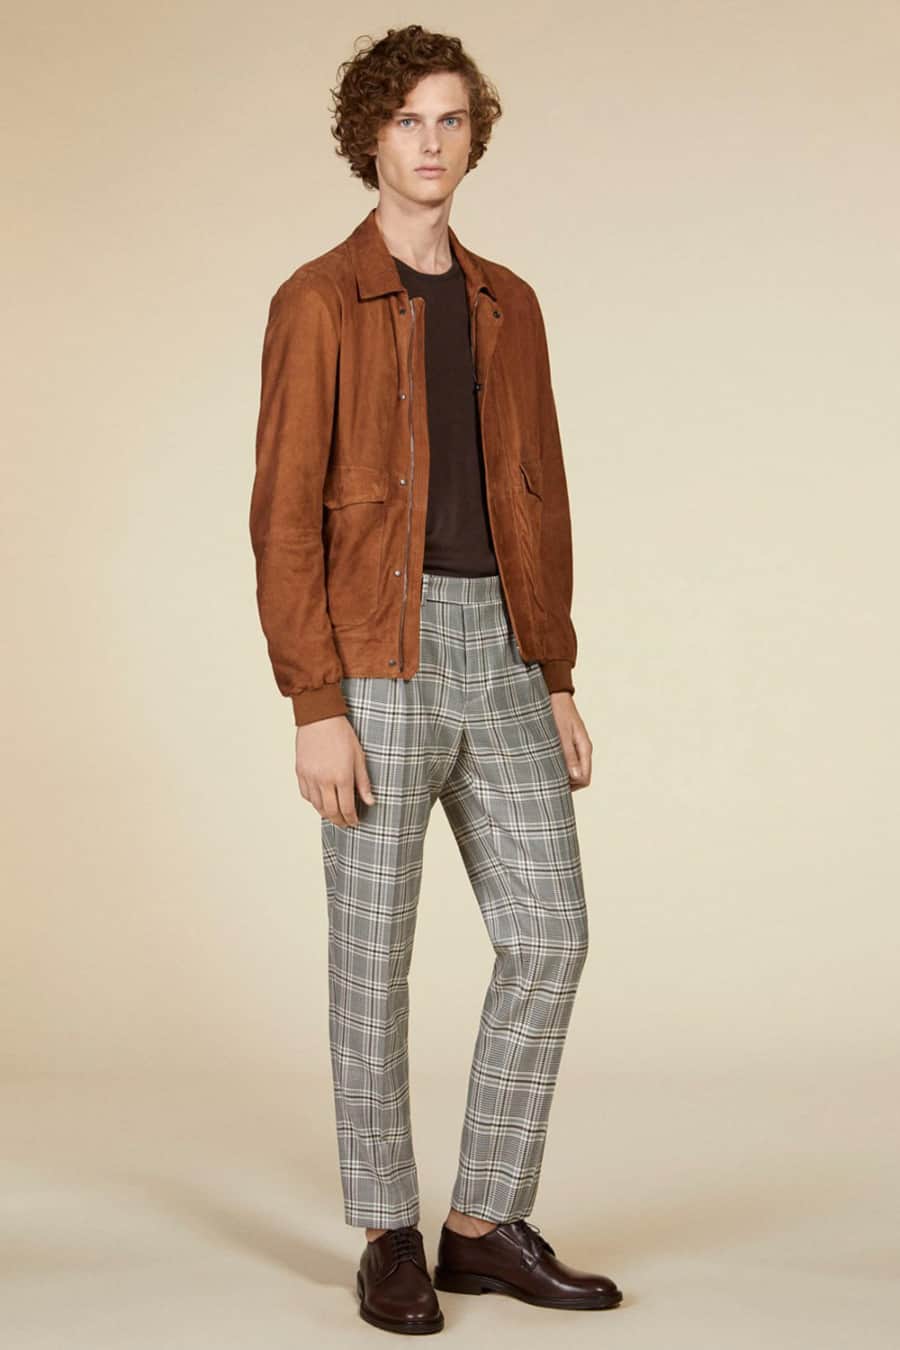 Men's grey plaid pants, brown T-shirt, suede jacket and brown Derby shoes outfit